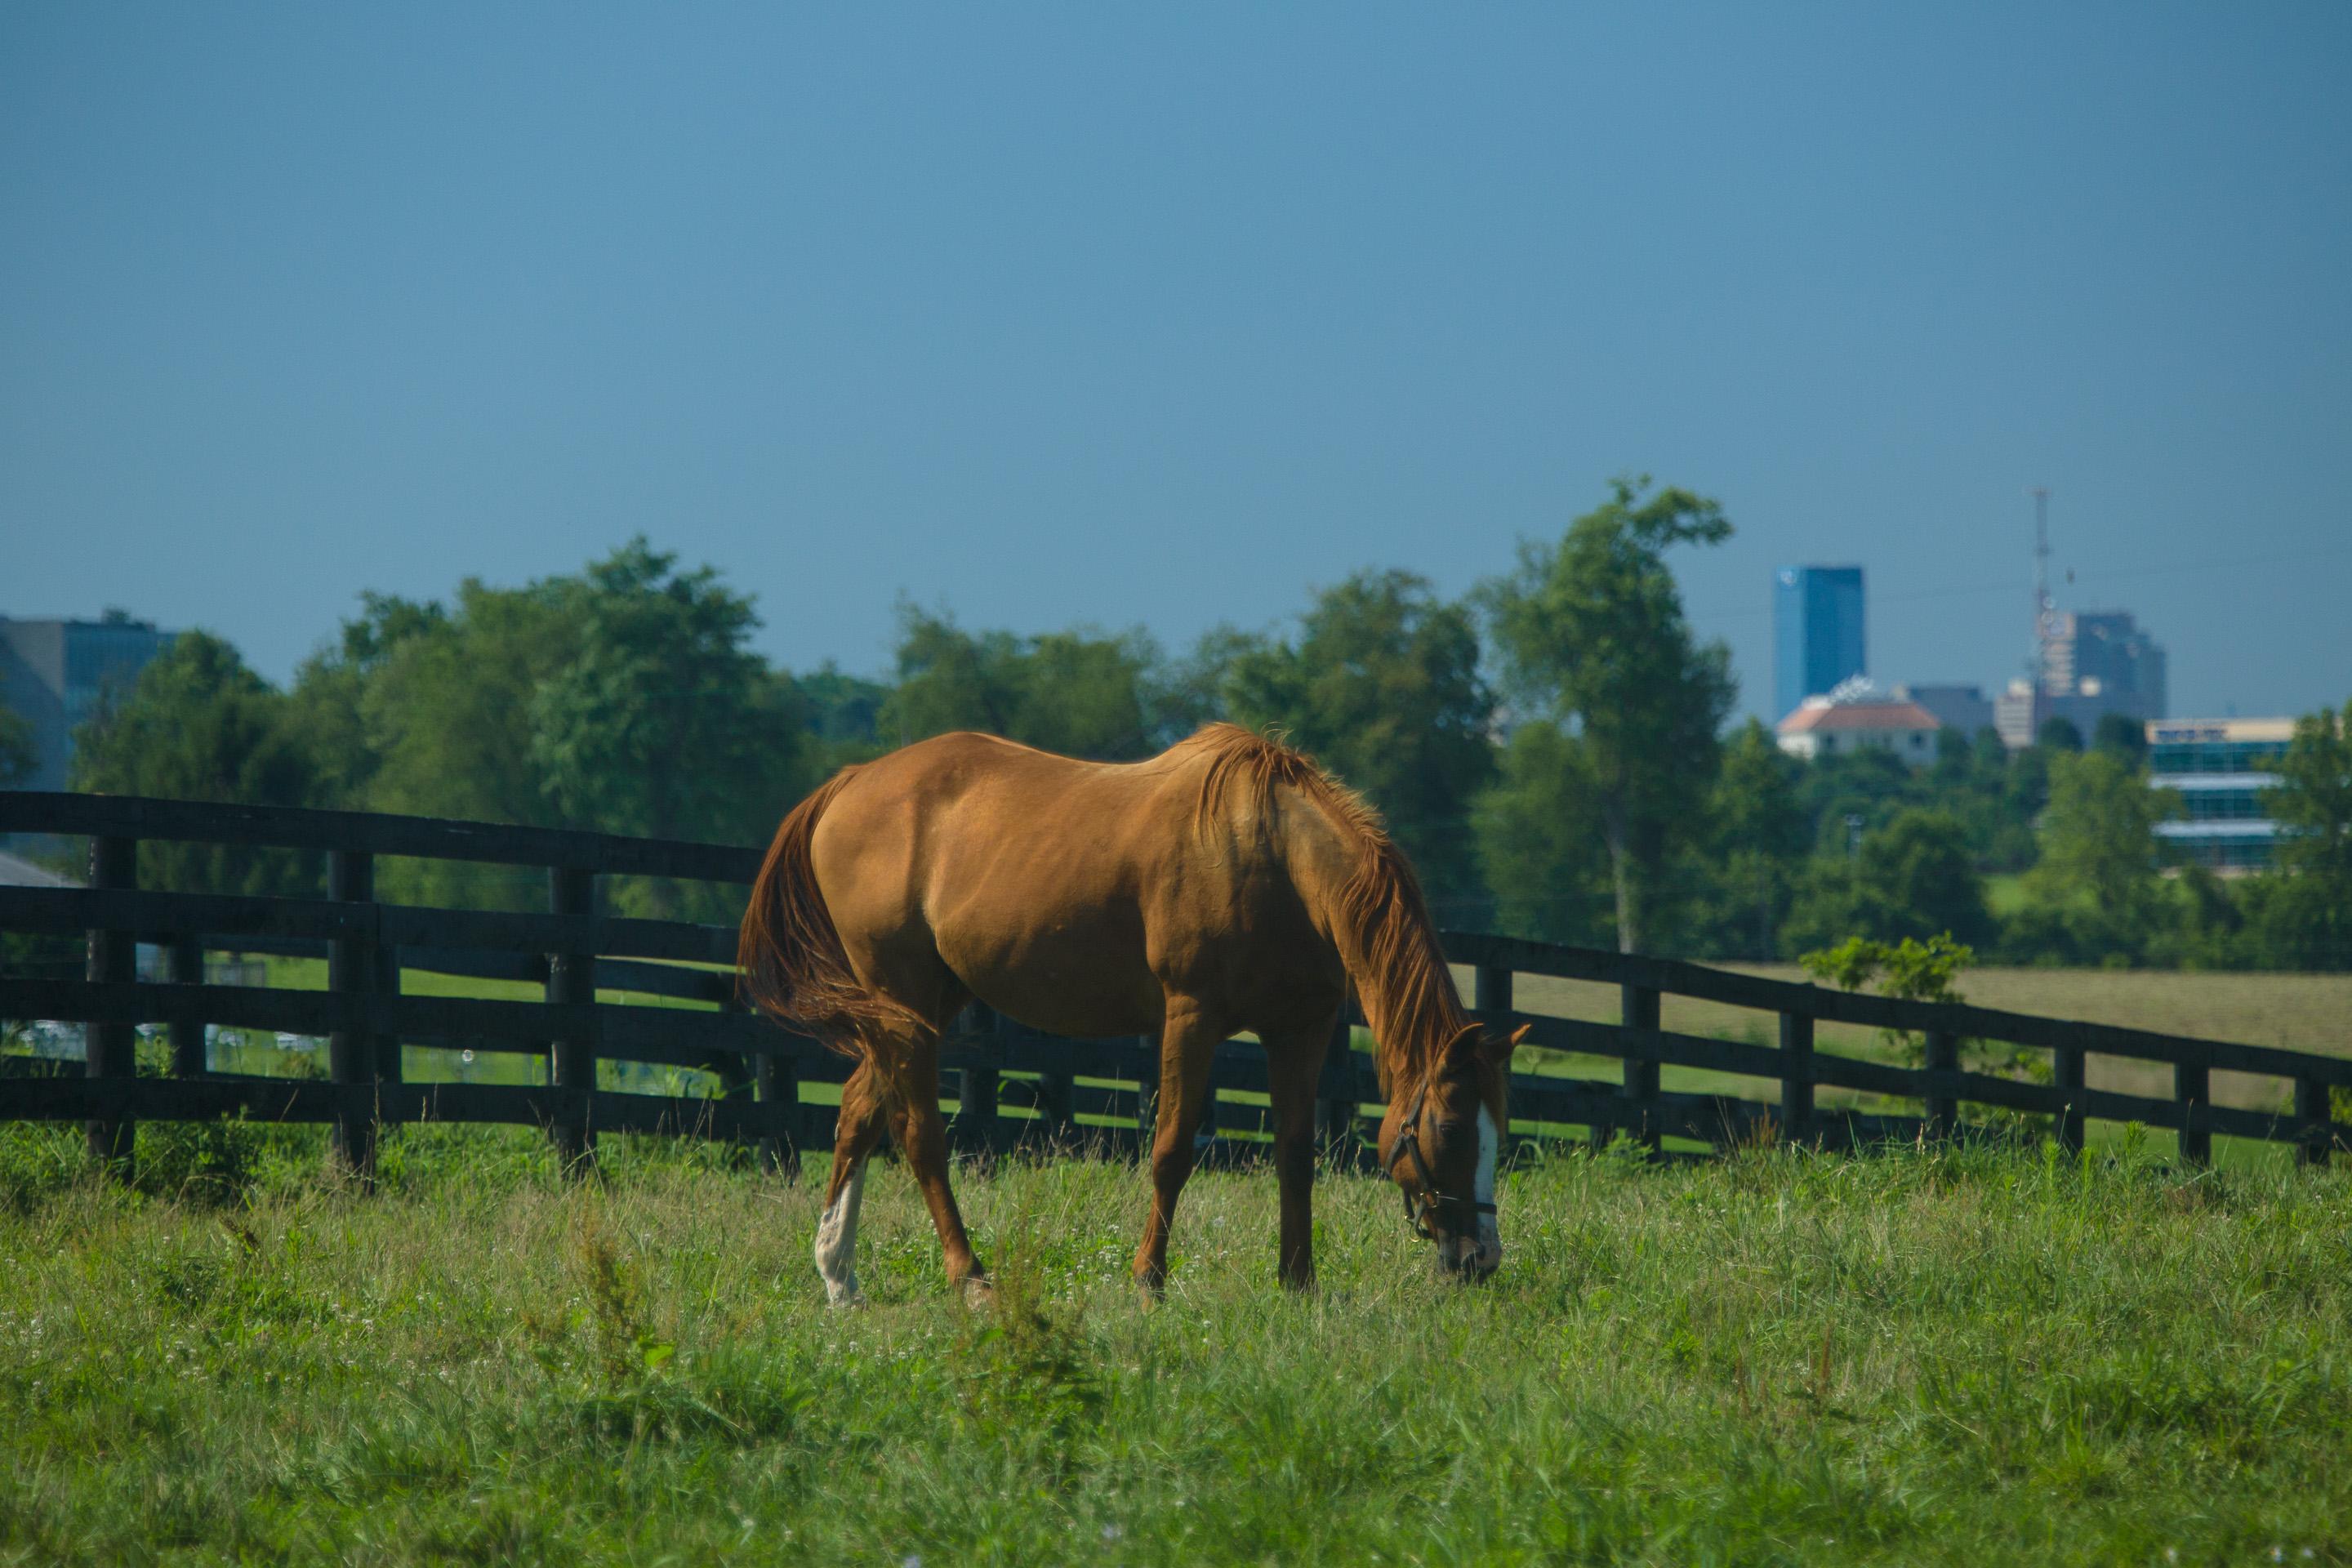 A horse grazing in the foreground, Lexington downtown in the background